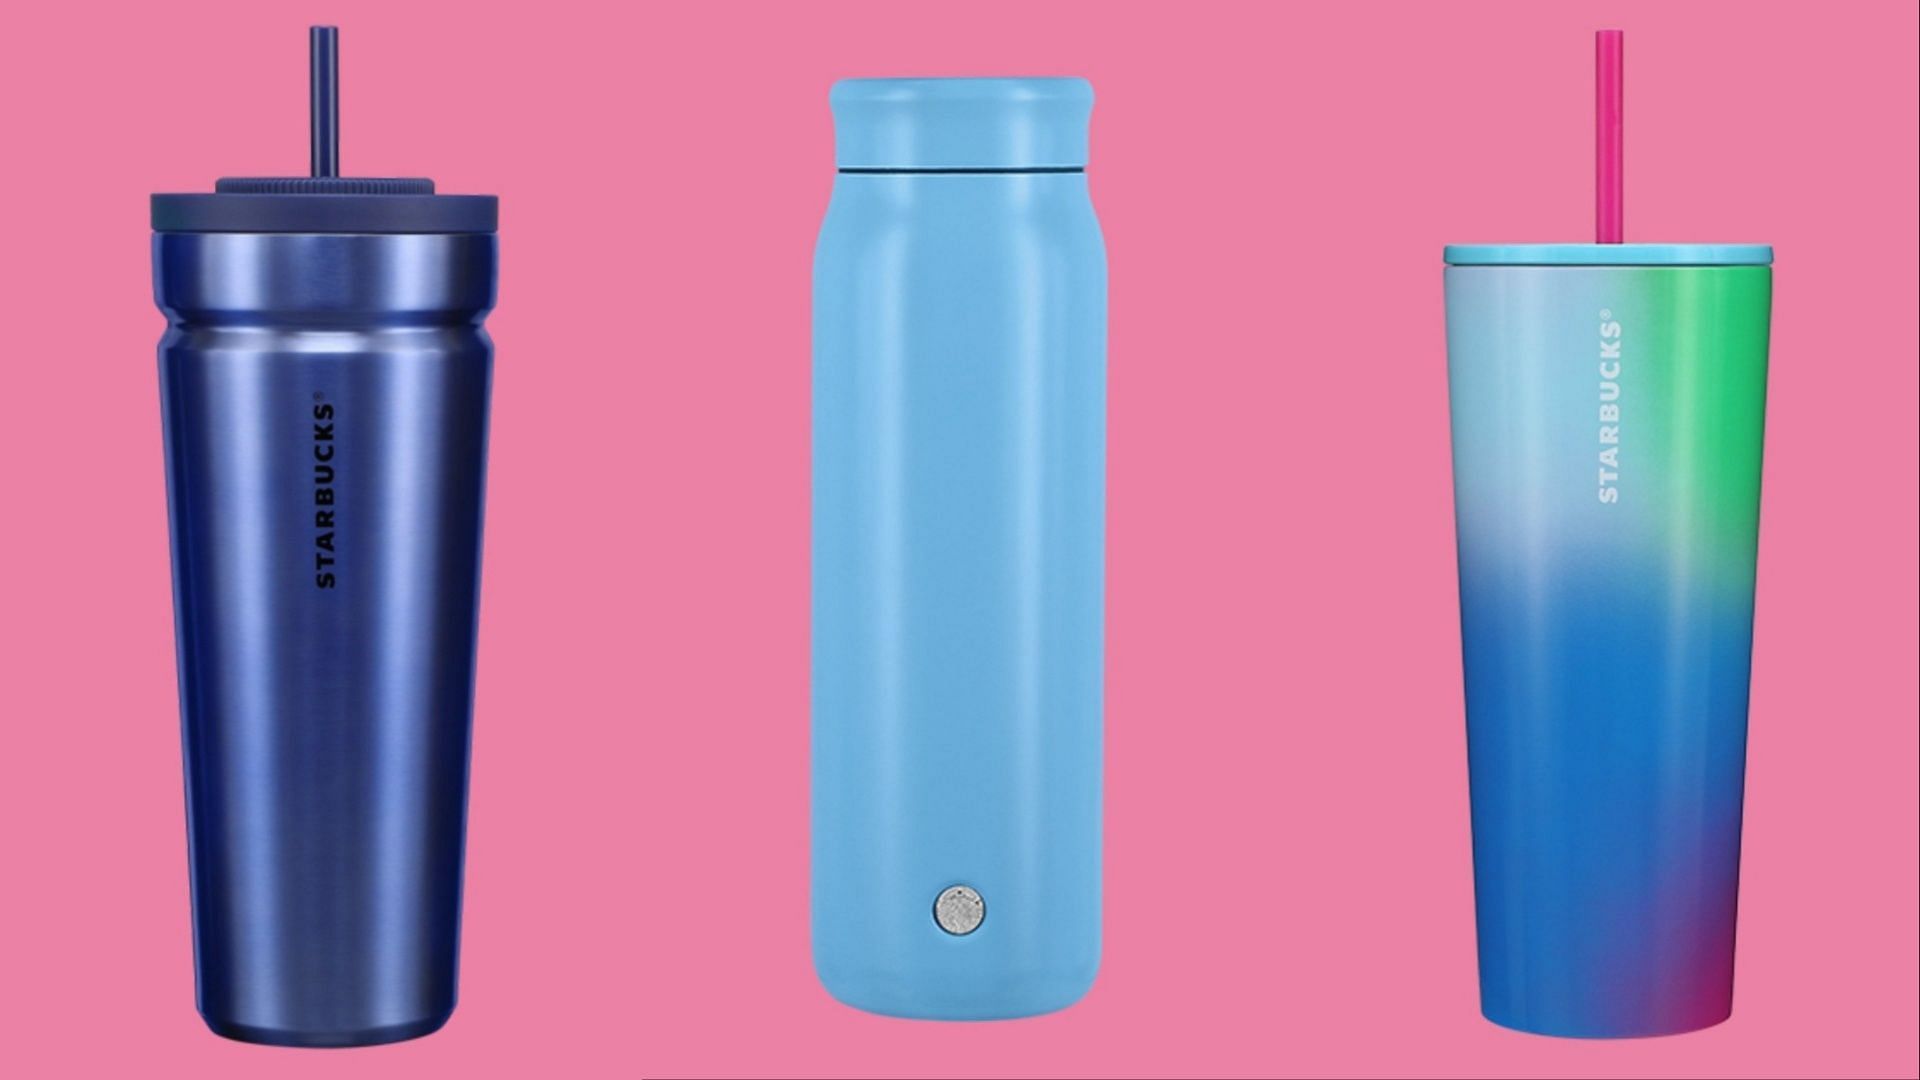 Starbucks drops new purple studded and color-changing cups for summer 2022